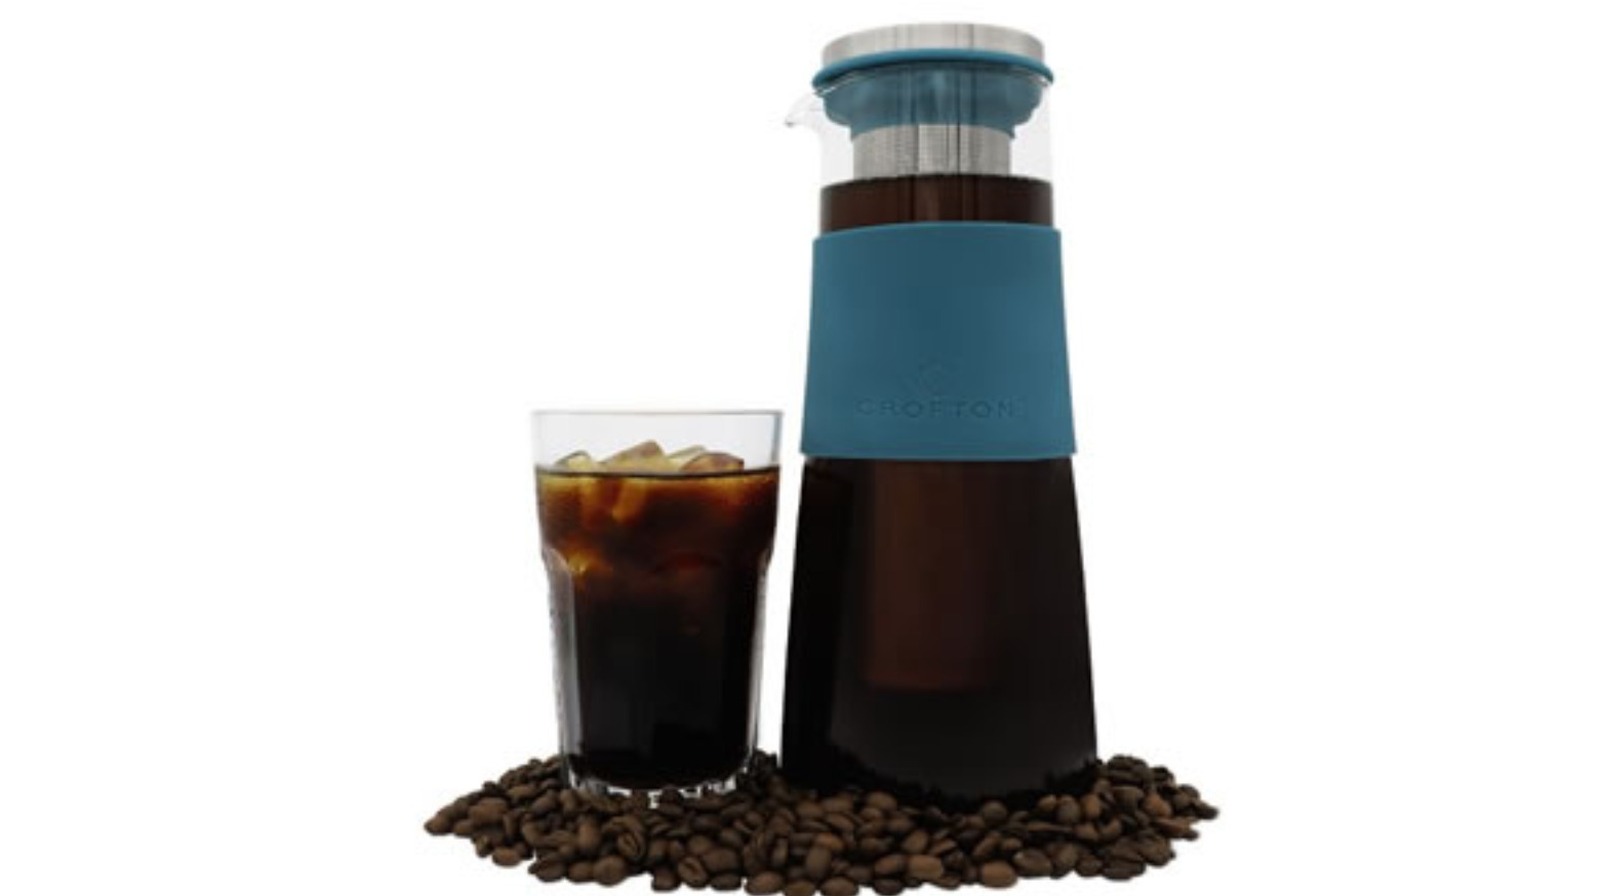 https://www.mashed.com/img/gallery/aldi-fans-are-freaking-out-about-this-cold-brew-coffee-system/l-intro-1625754365.jpg